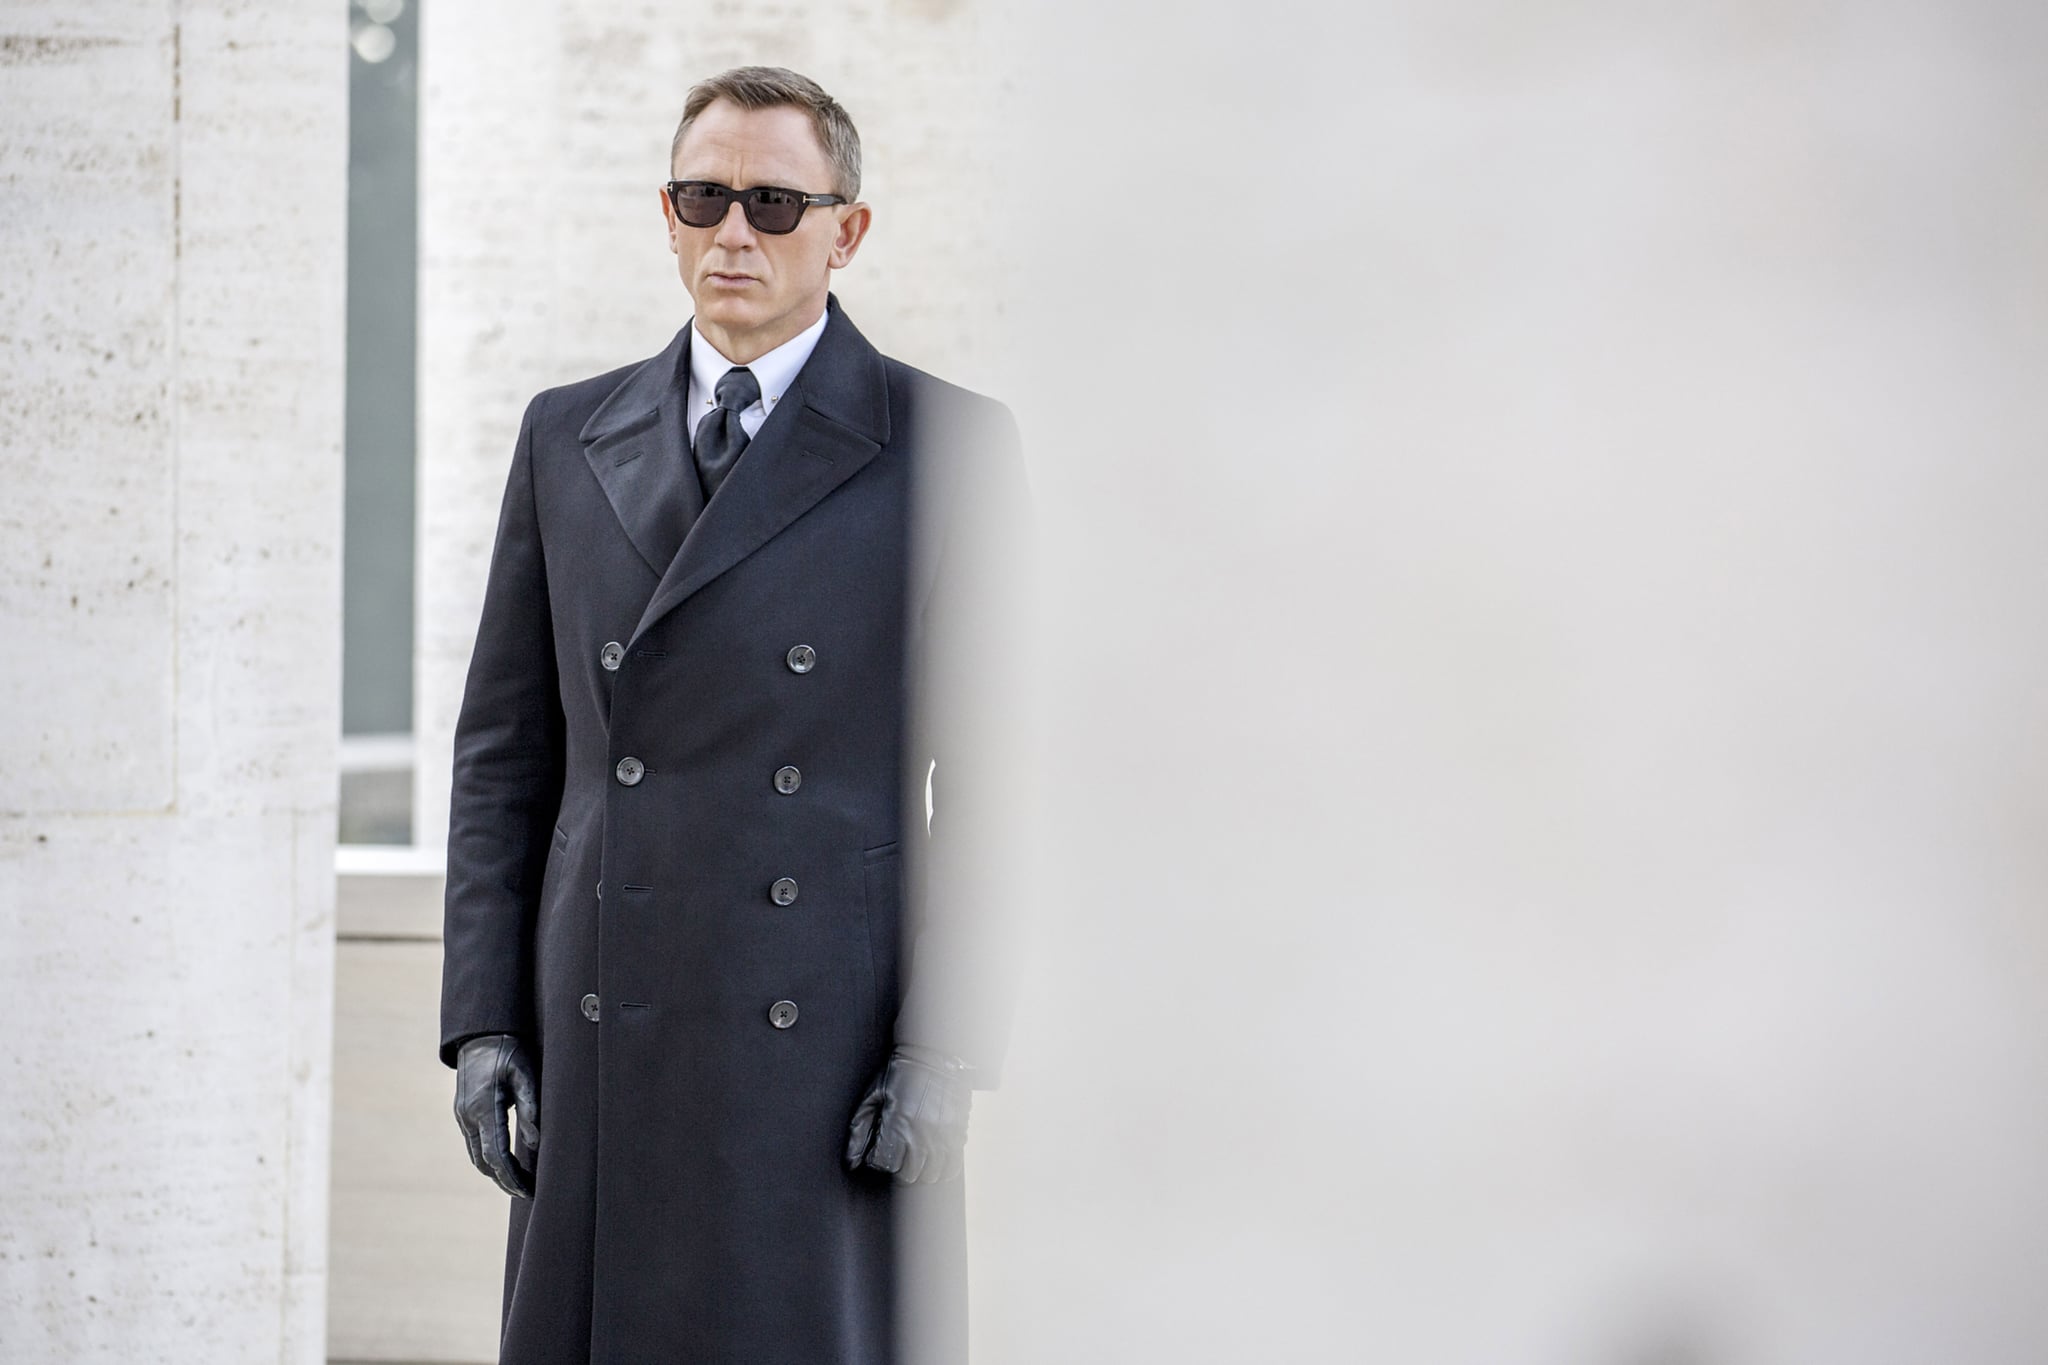 SPECTRE, Daniel Craig, 2015. ph: Jonathan Olley/Columbia Pictures/Courtesy Everett Collection